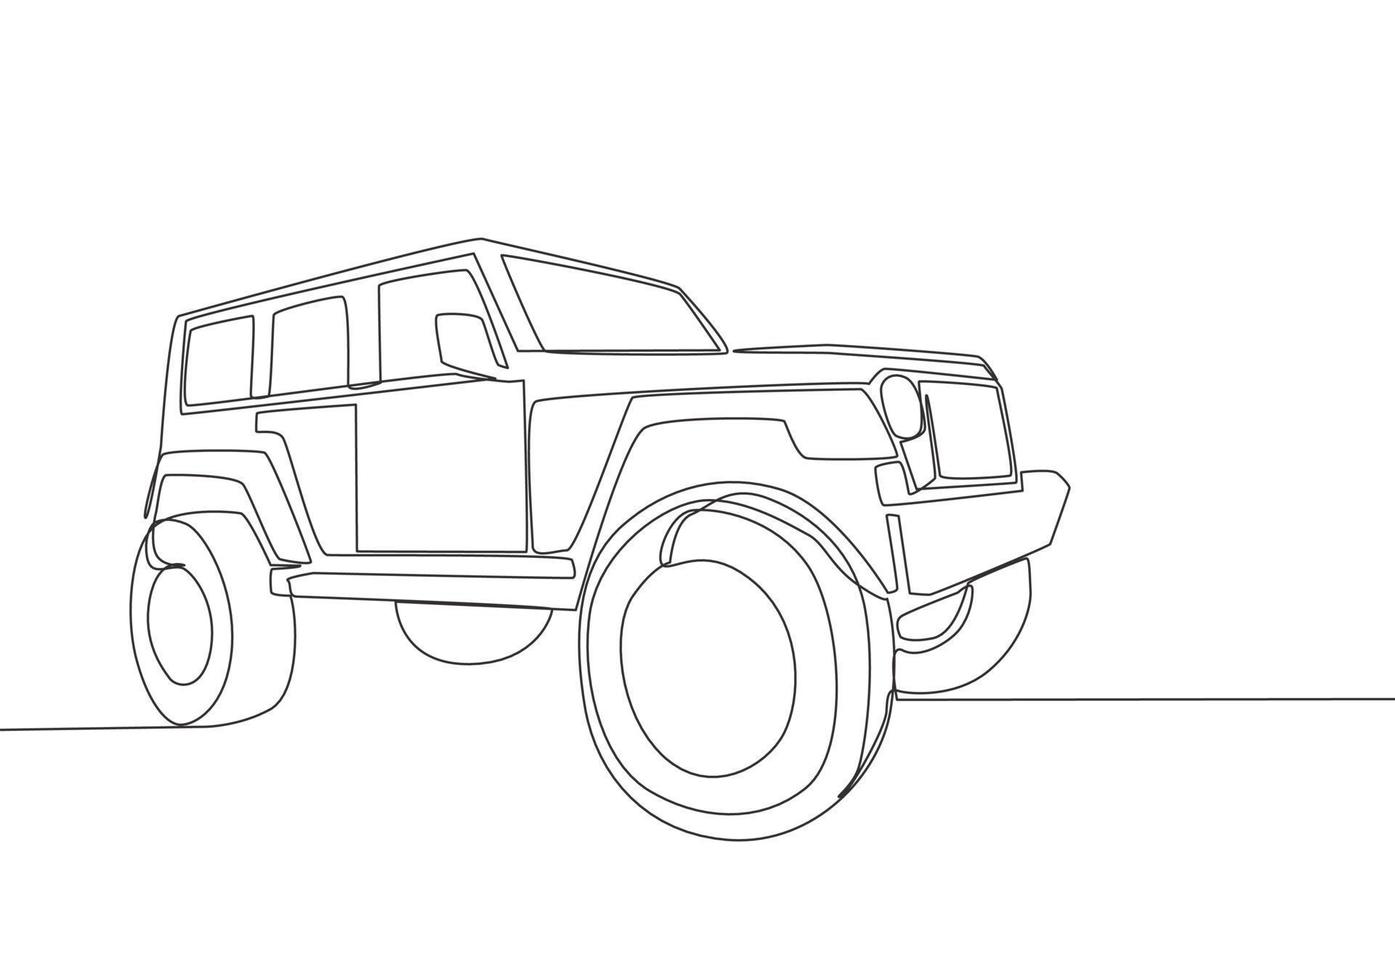 Single line drawing of 4x4 wheel drive tough jeep trail car. Adventure offroad rally vehicle transportation concept. One continuous line draw design vector